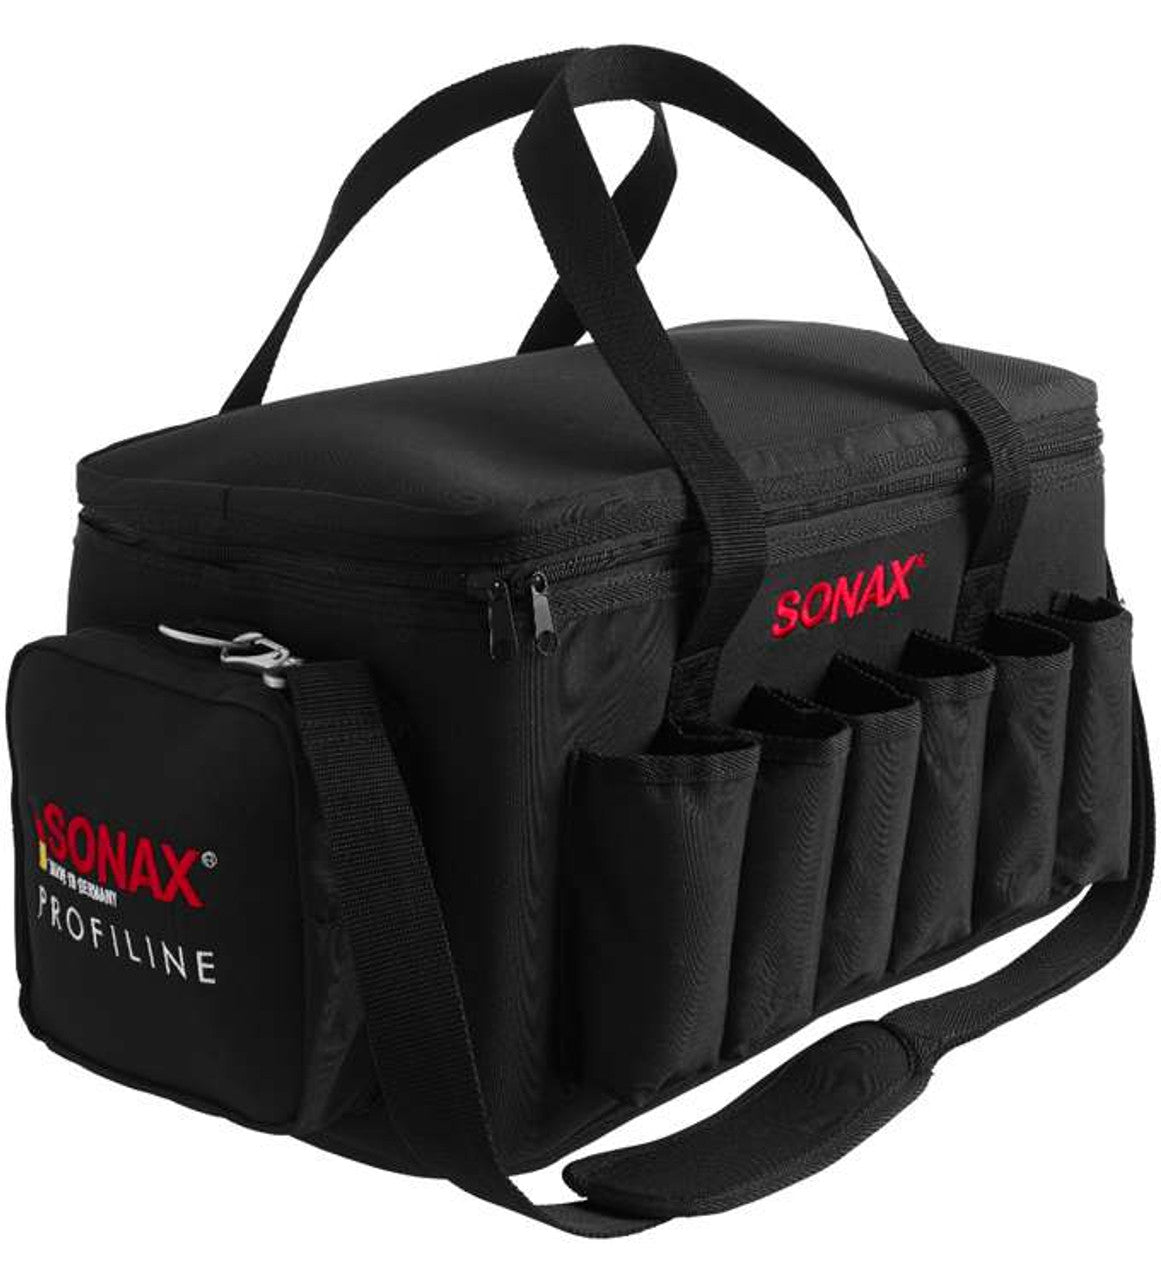 Sonax Polishing Bag - Sierra Madre Collection